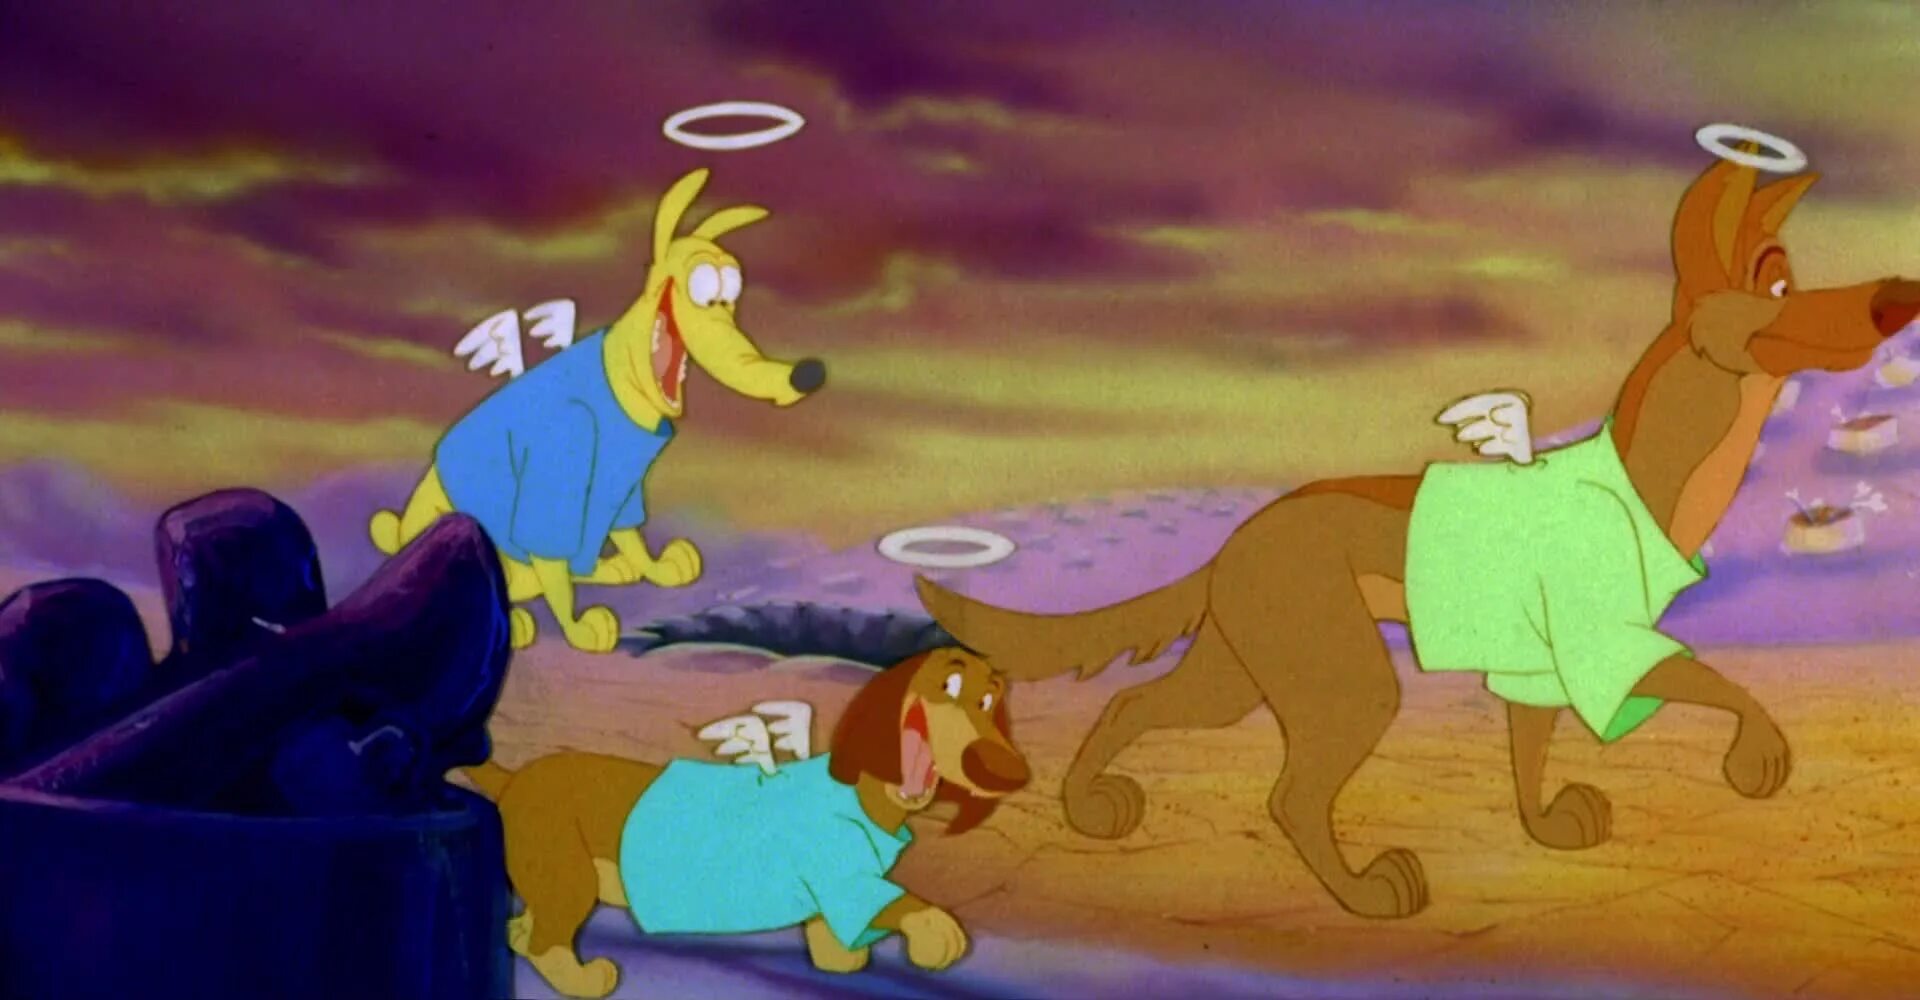 All Dogs go to Heaven 2 1996. Псы попадают в рай 2. Псы попадают в рай.